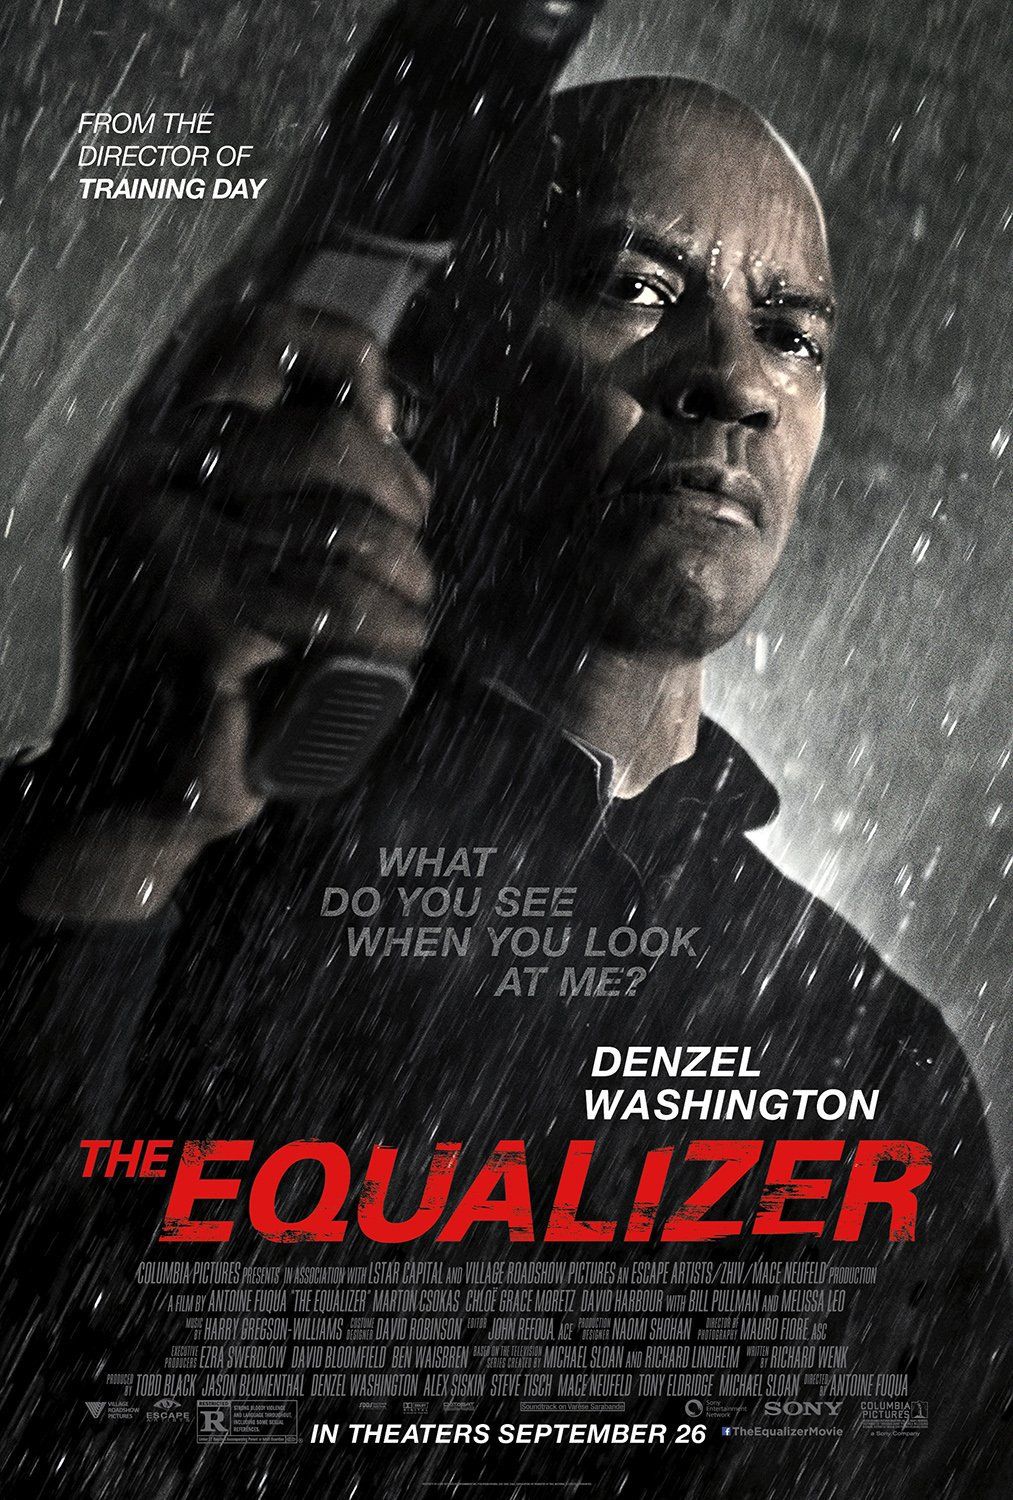 The Equalizer  (2014) Hindi Dubbed Movie